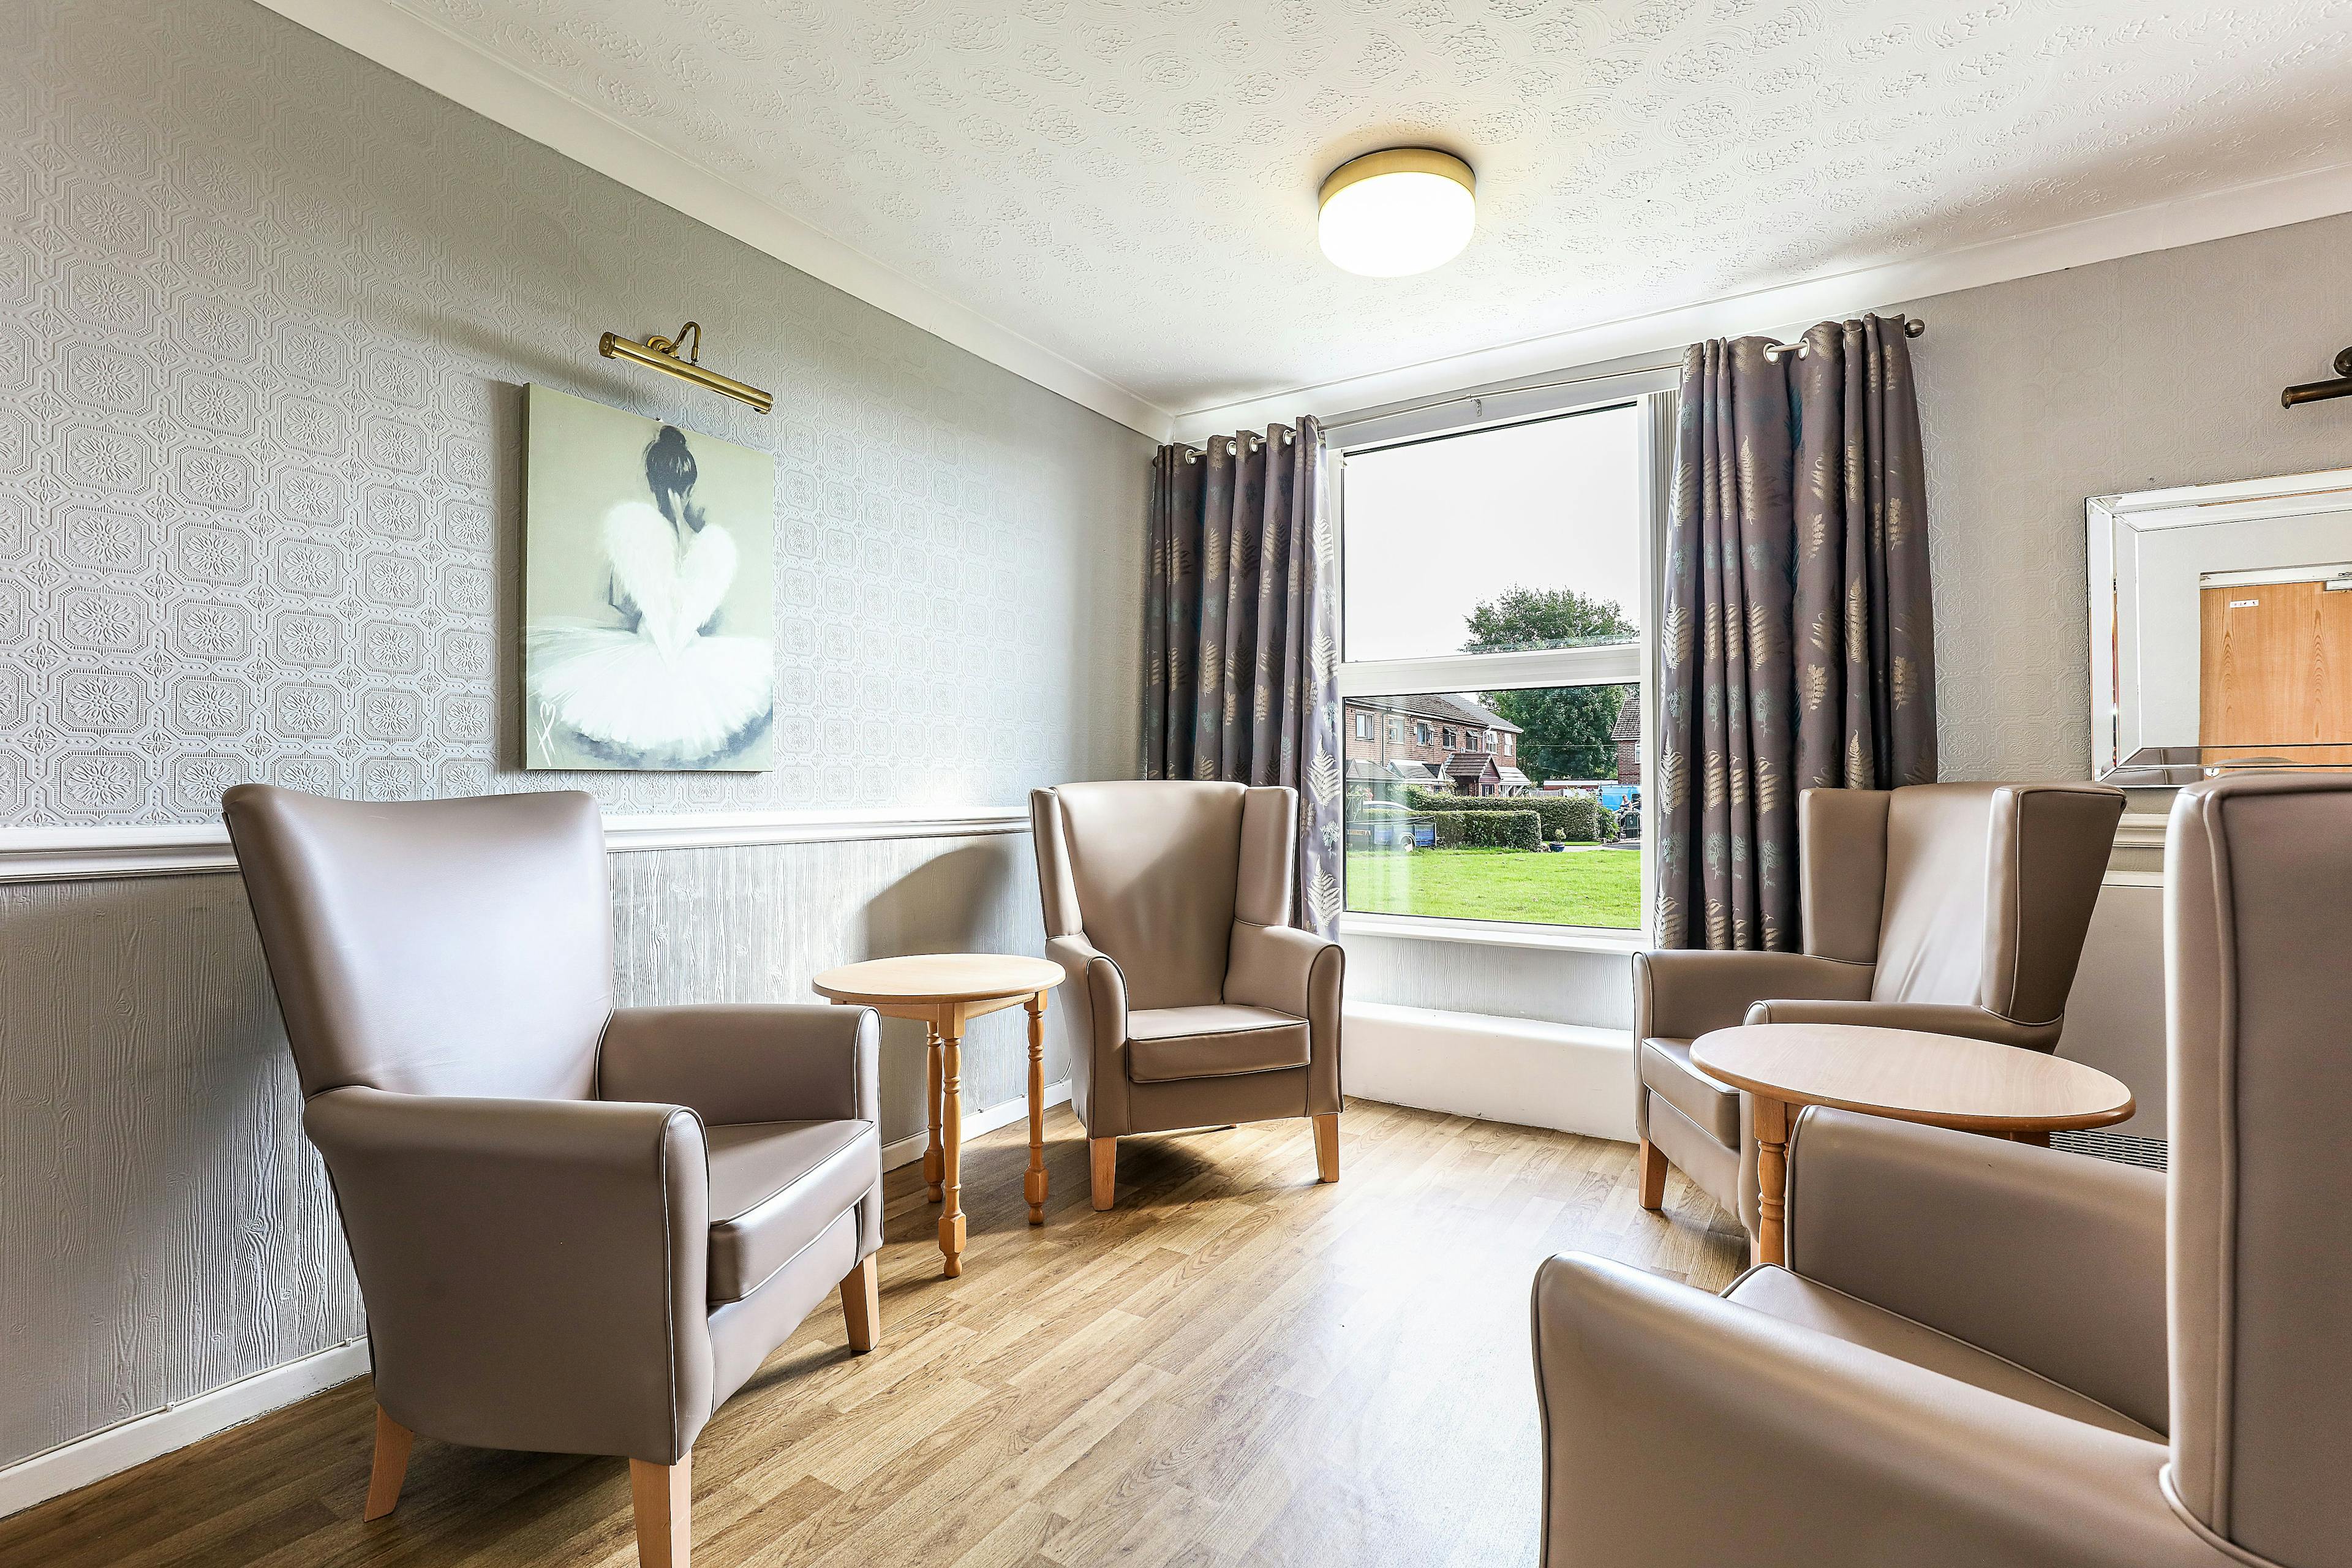 Minster Care Group - Thorley House care home 1